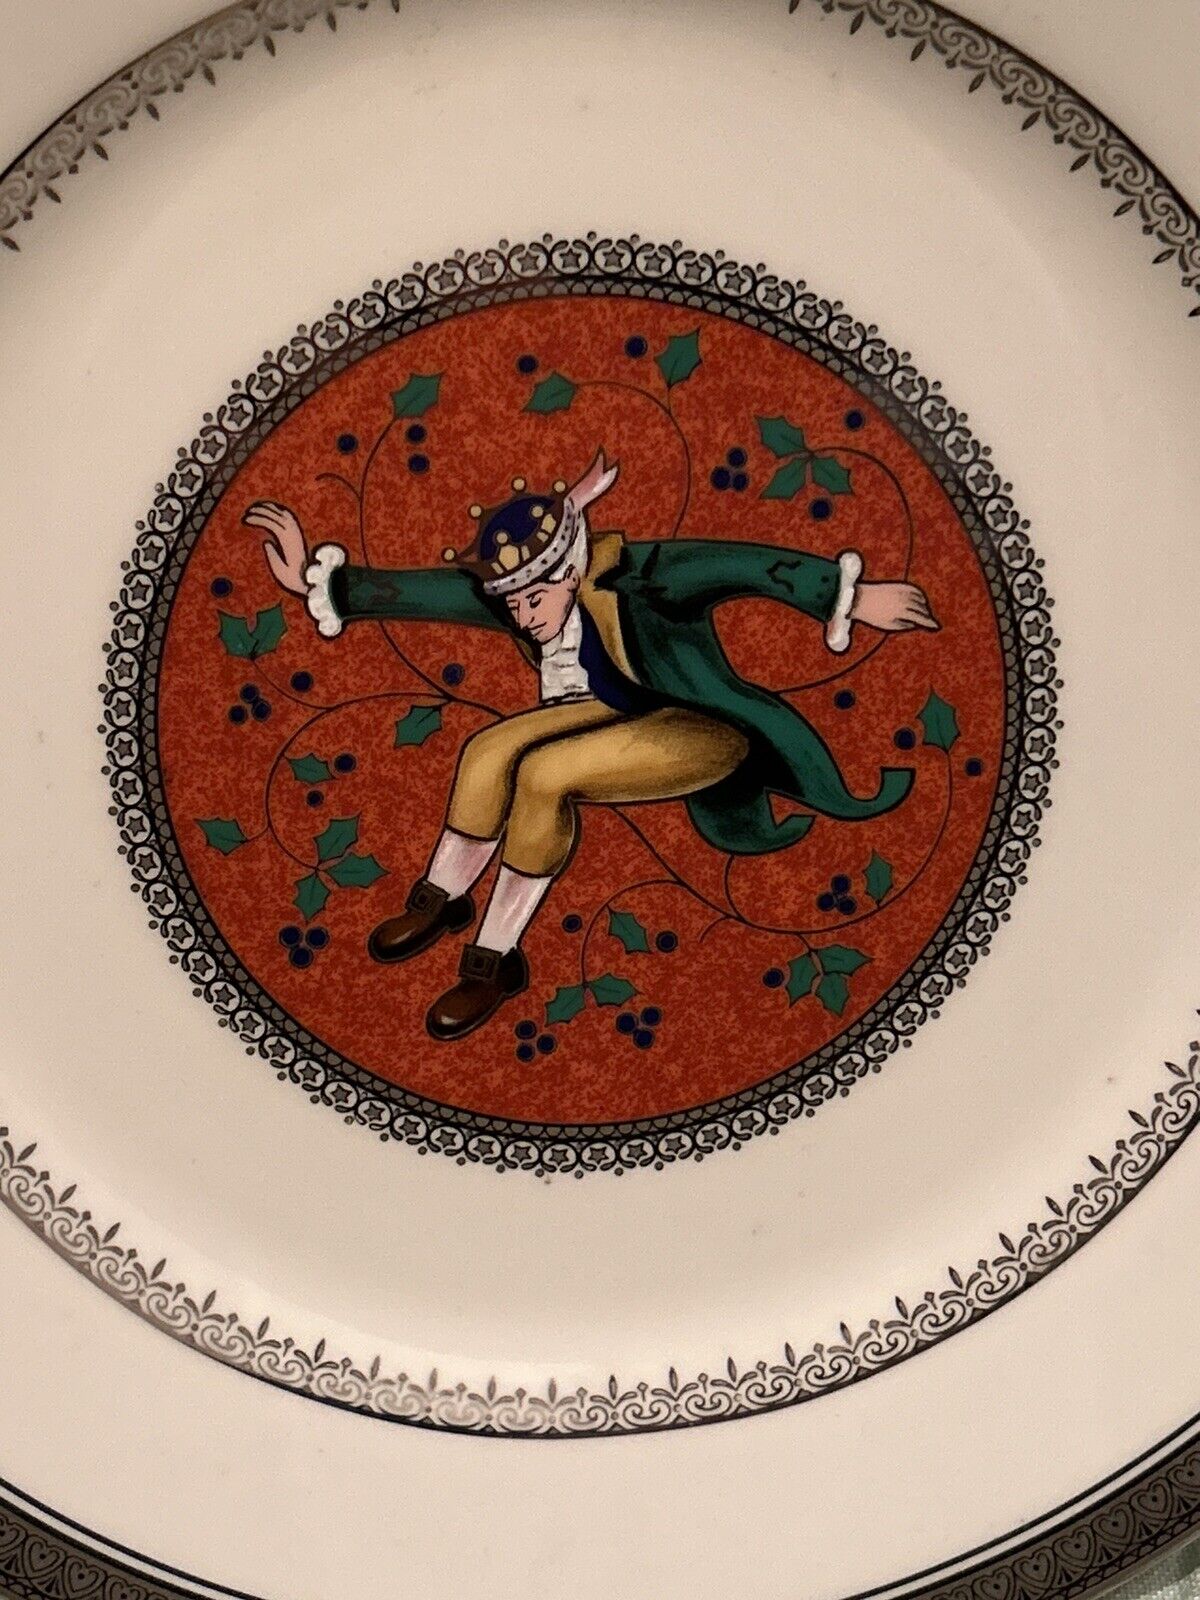 Vintage “Ten Lords a Leaping” Collector Plate